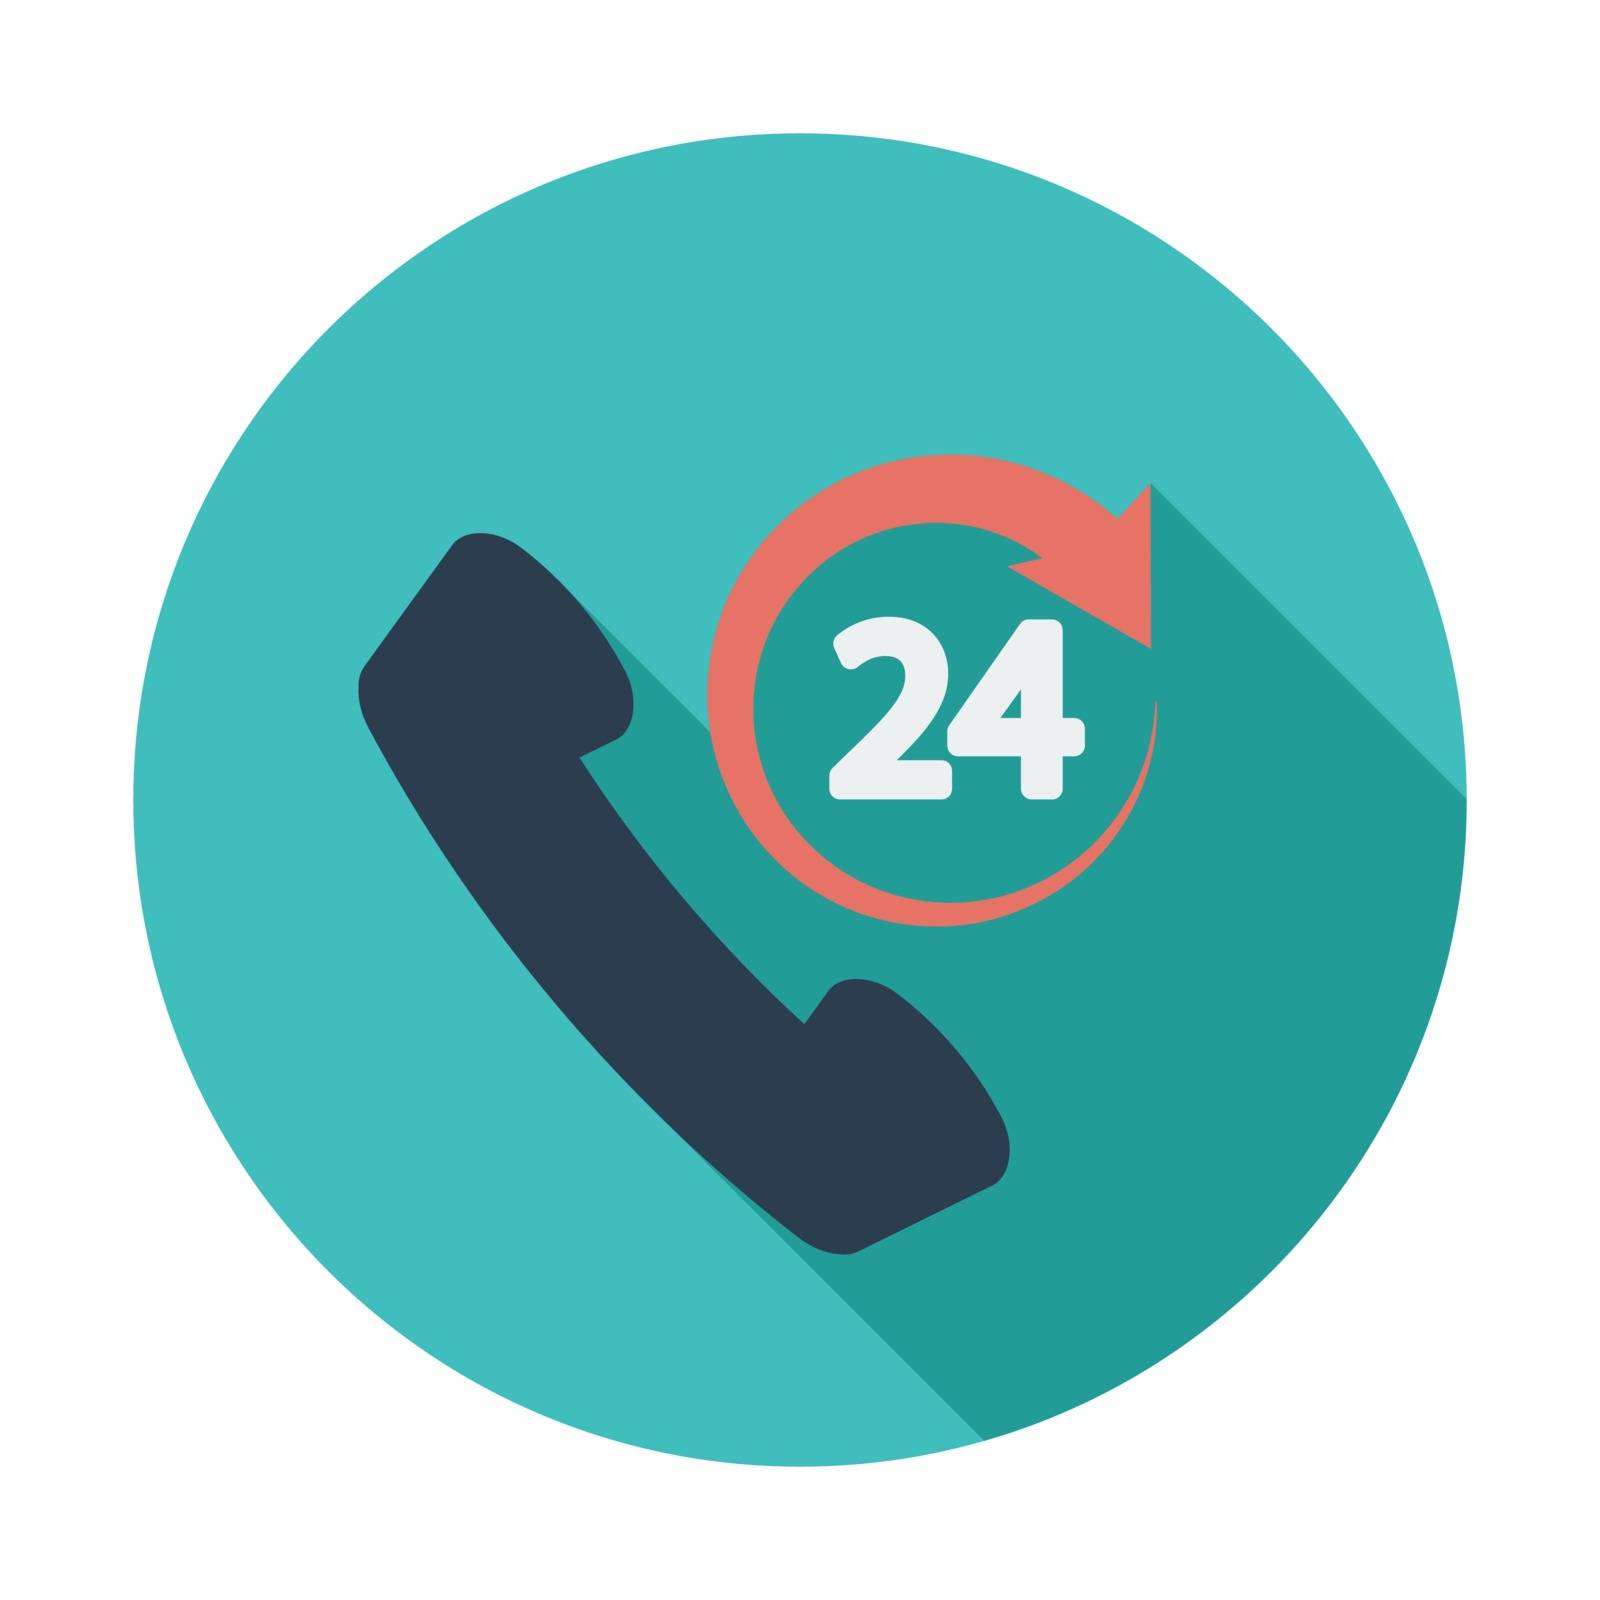 Support 24 hours. Single flat color icon. Vector illustration.